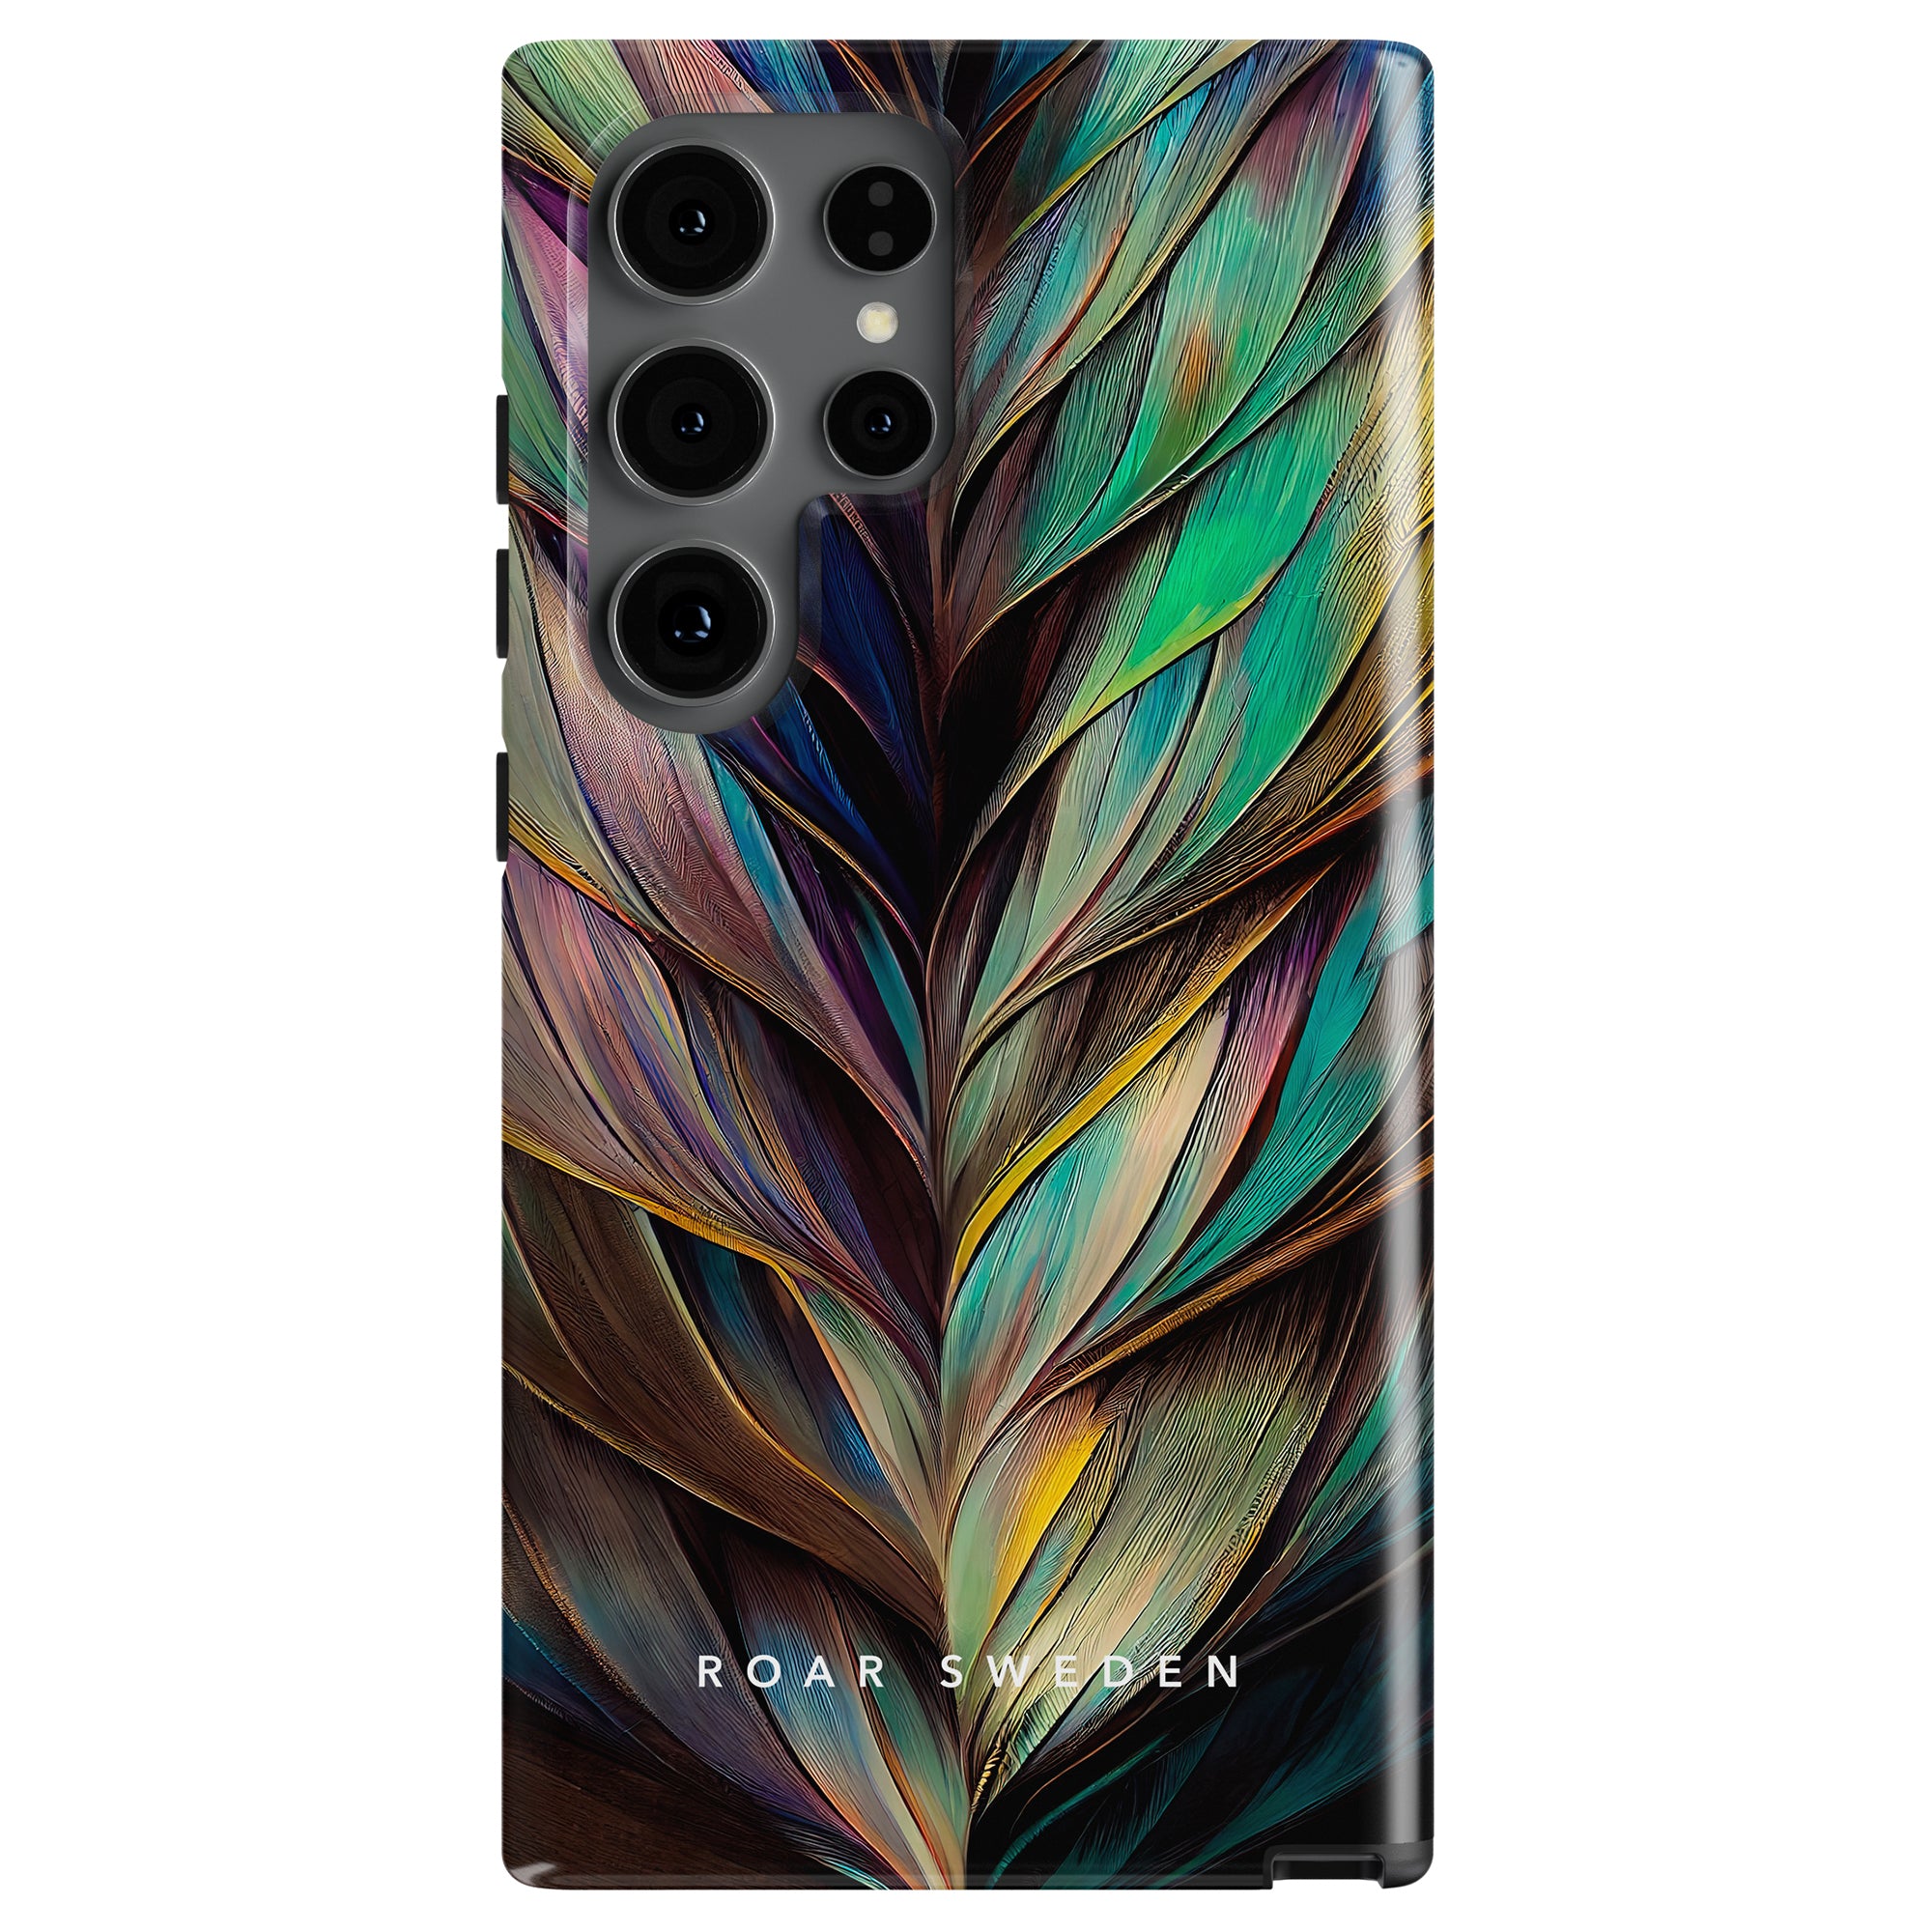 Smartphone with a vibrant, feather-like patterned case from ROAR SWEDEN, featuring the Feathers - Tough case for added flair and skydd mot repor.